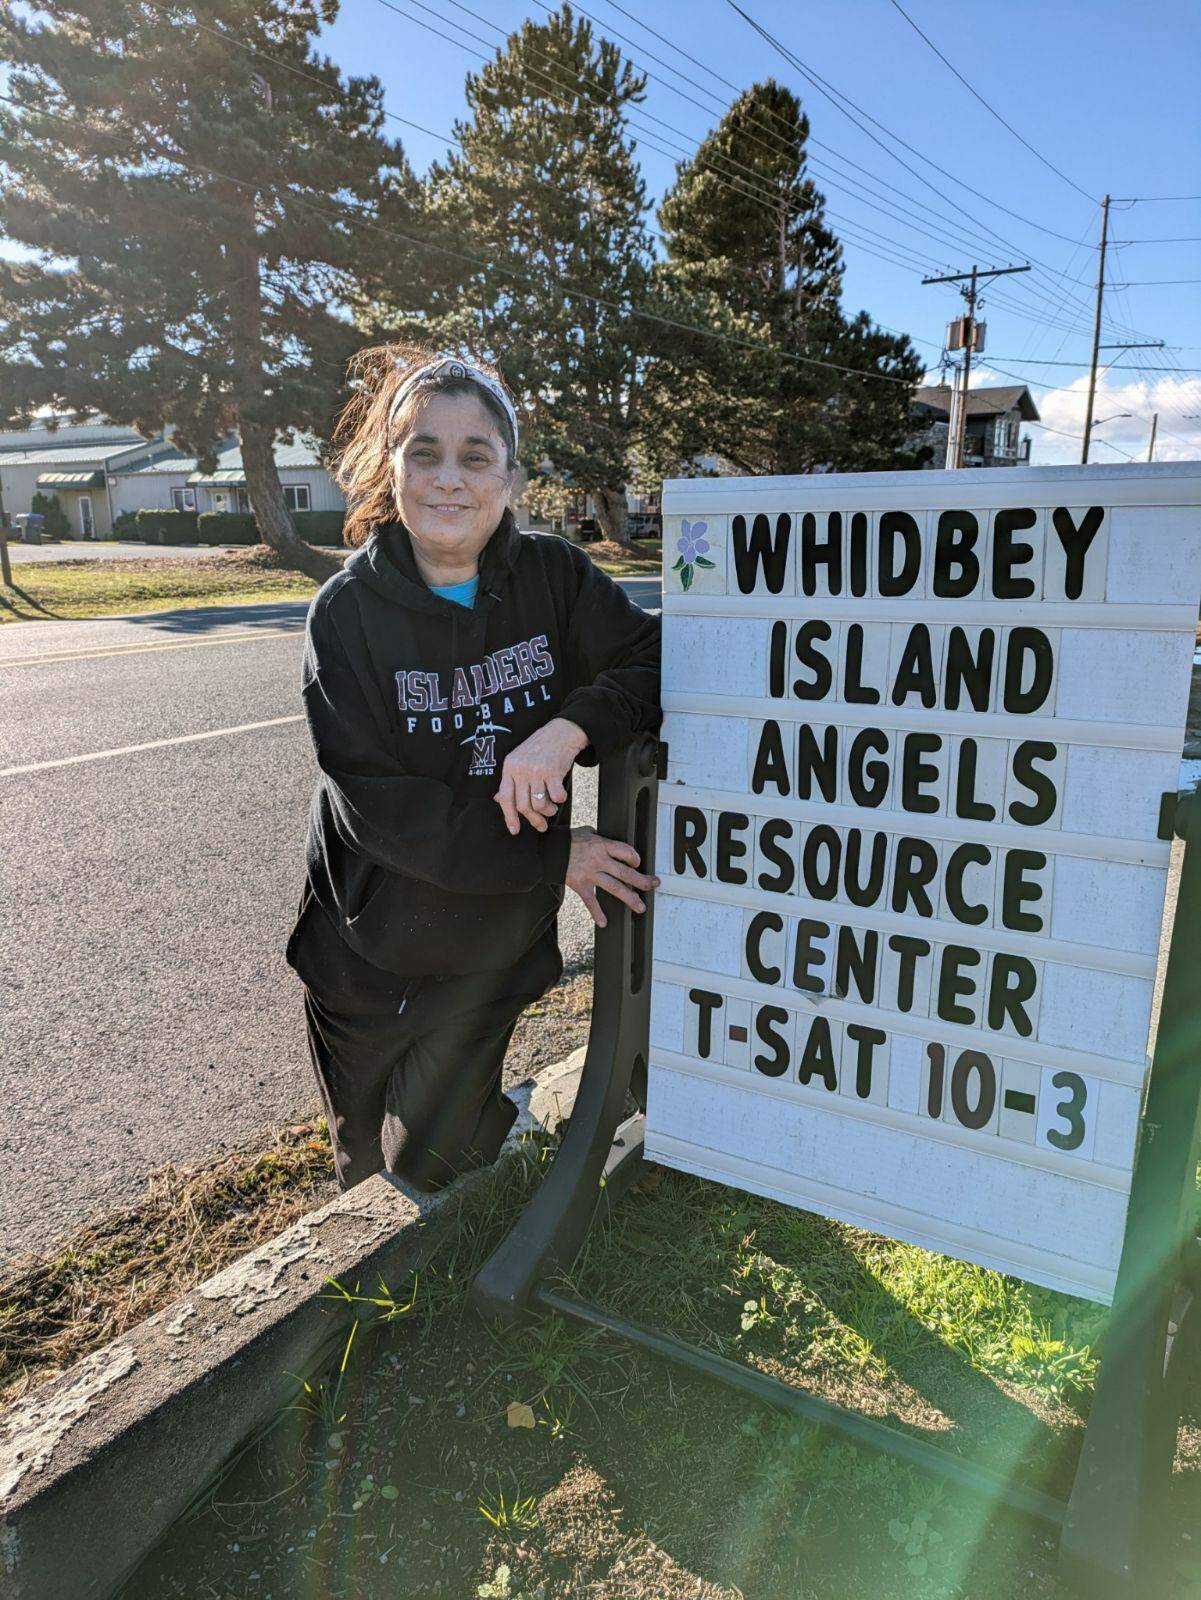 For the past four years, Cindy Buchanan has helped organize a network of volunteers known as Whidbey Island Angels. The resource center of the same name, which was located in Freeland, closed last week. (Photo provided)